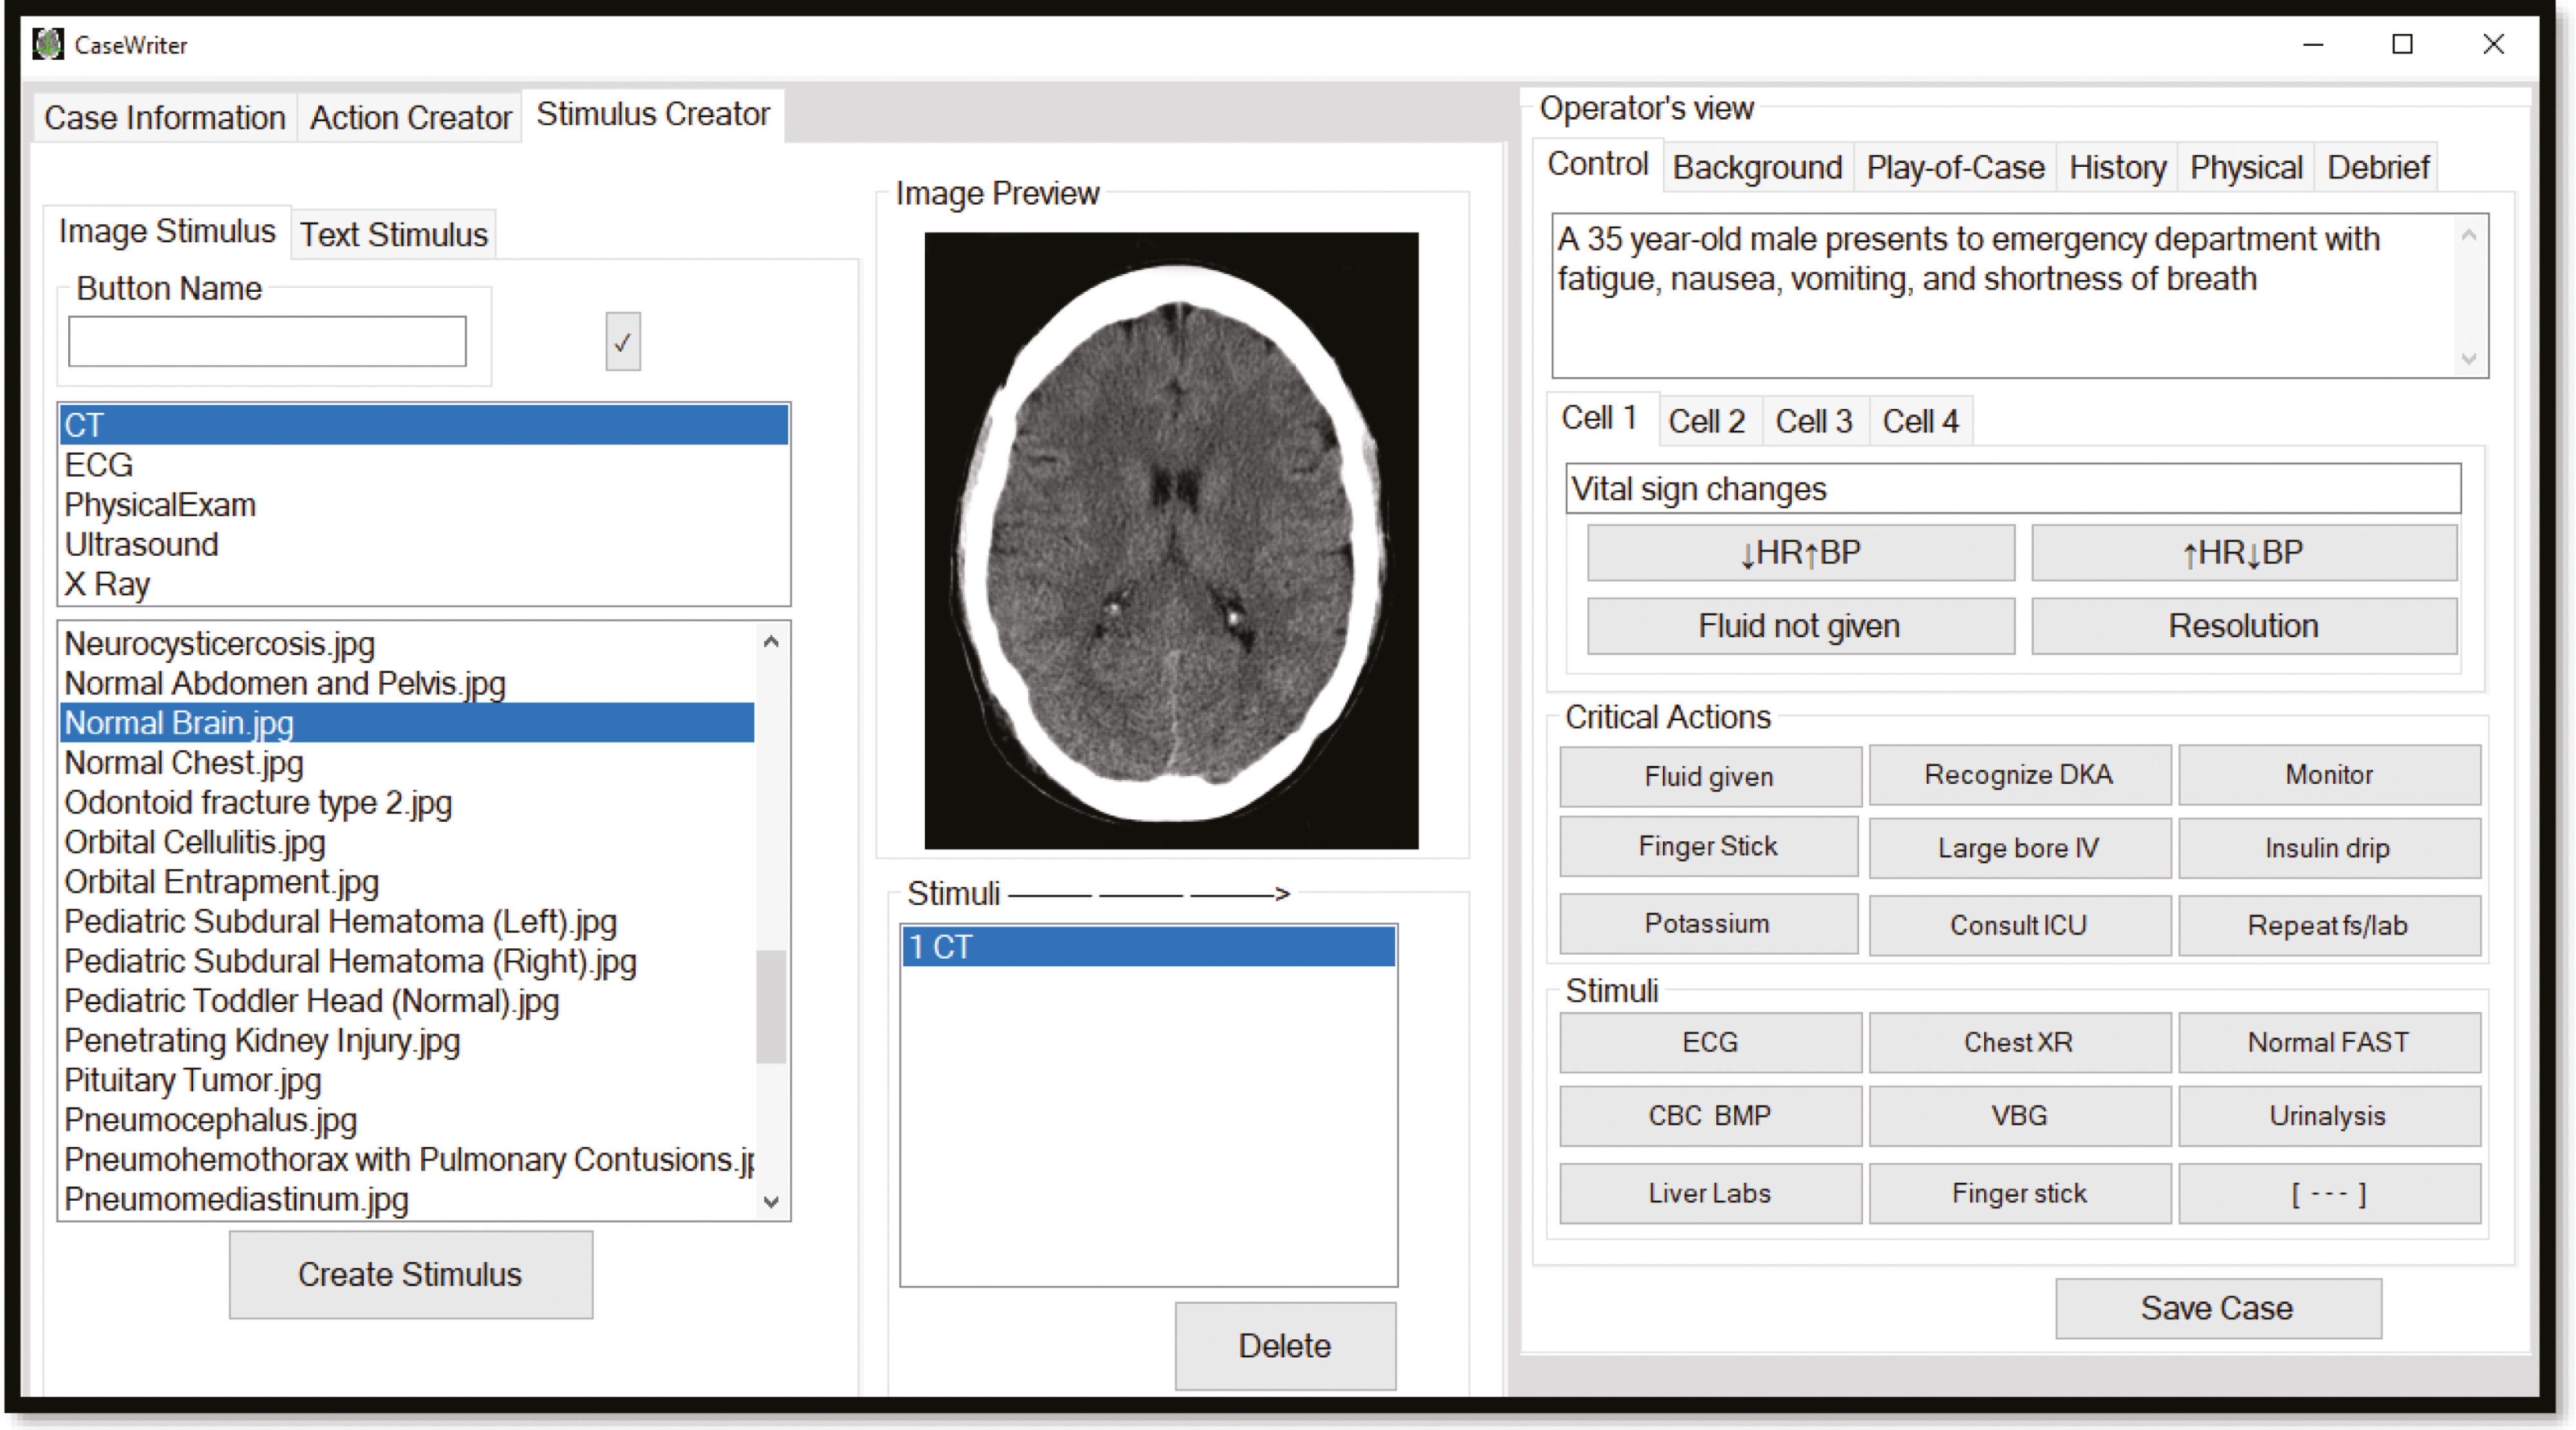 Med Sim Studio allows authors to develop customized cases which include everything a simulation educator requires to teach: pre-scripted vital signs, embedded stimulus images and laboratory values, critical action tracking and case information (background, play-of-case, history, physical and a debrief guide). Cases can be shared from user to user easily via a centralized database, or sent through e-mail or portable digital media.